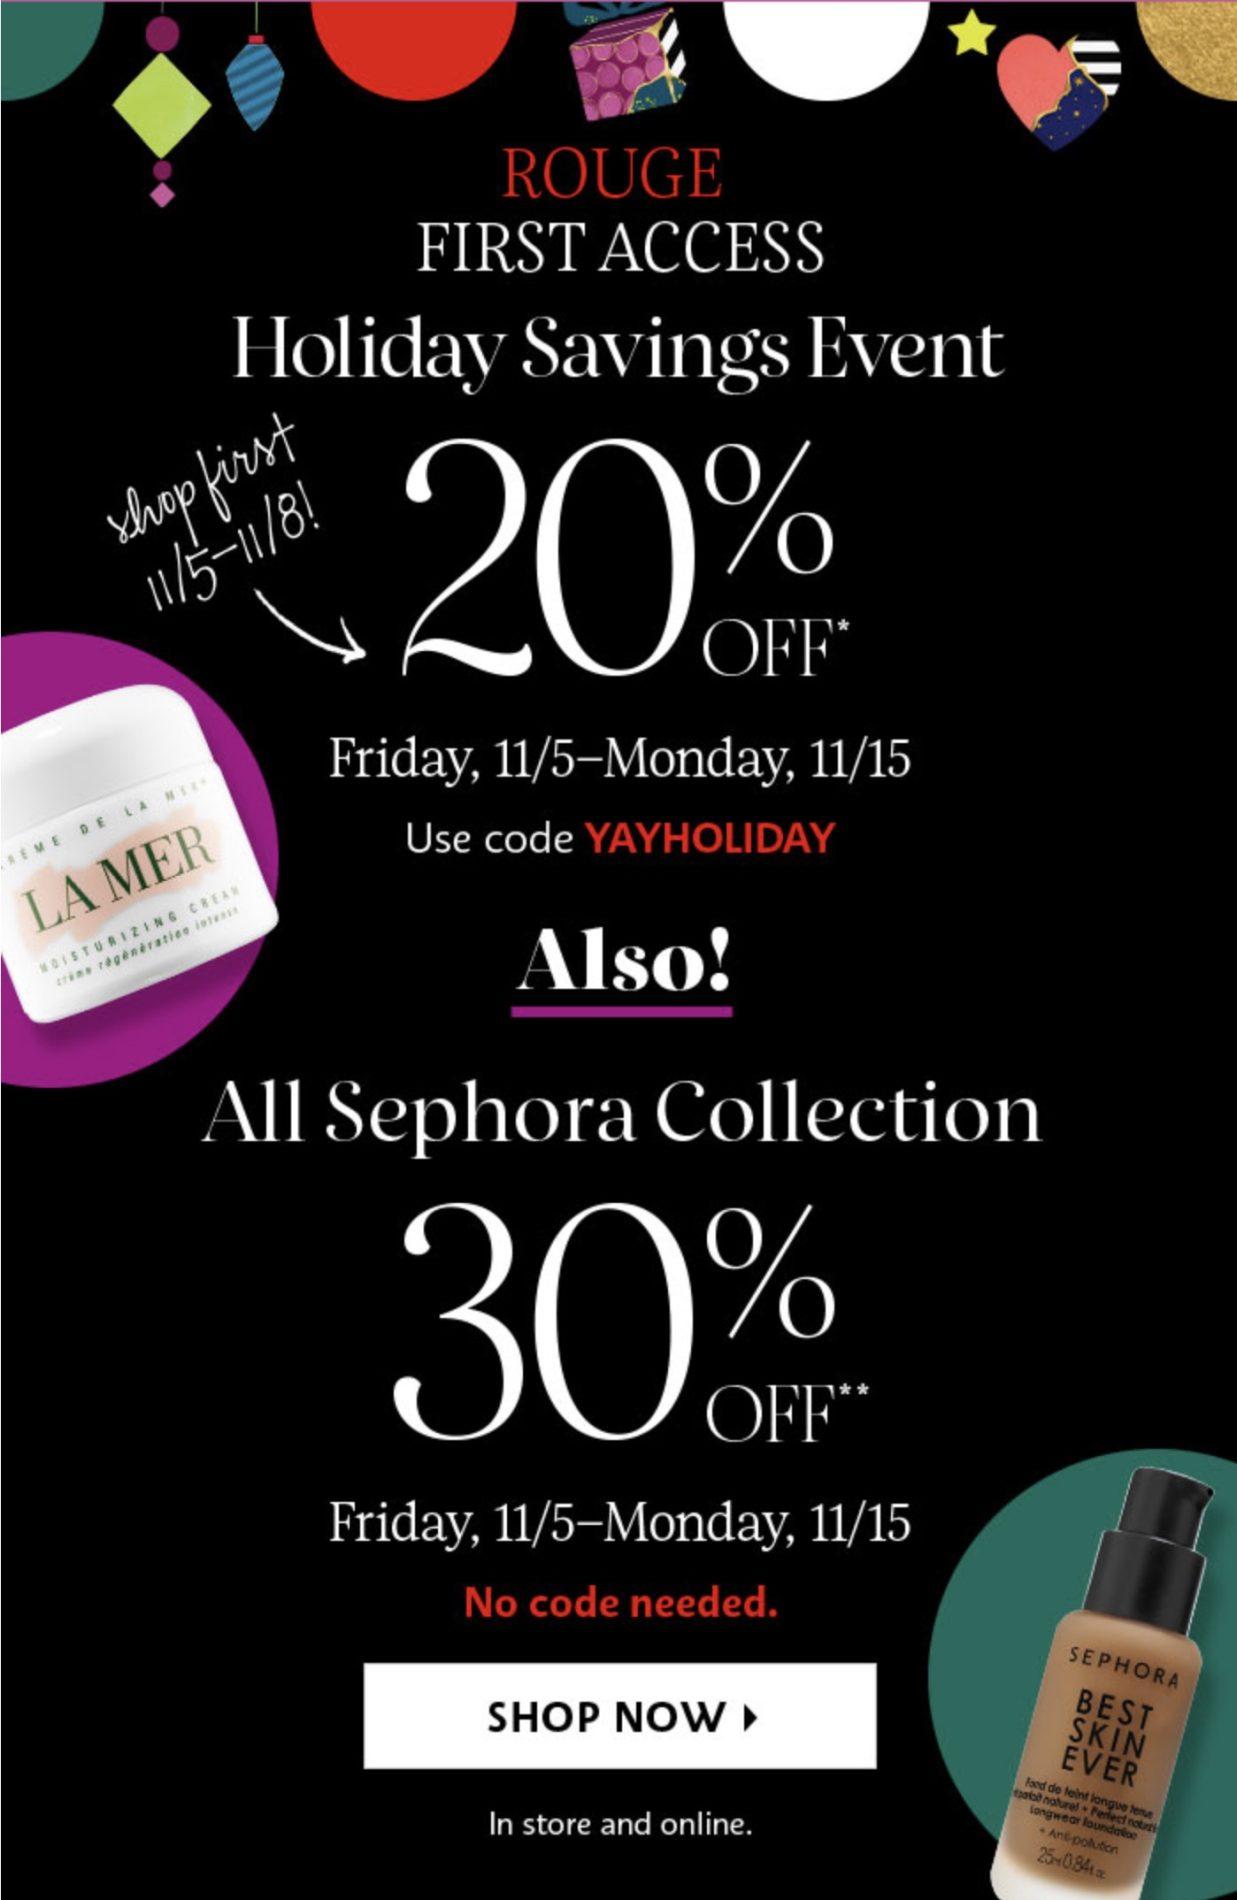 Sephora Rouge Holiday Savings Event Starts Now!